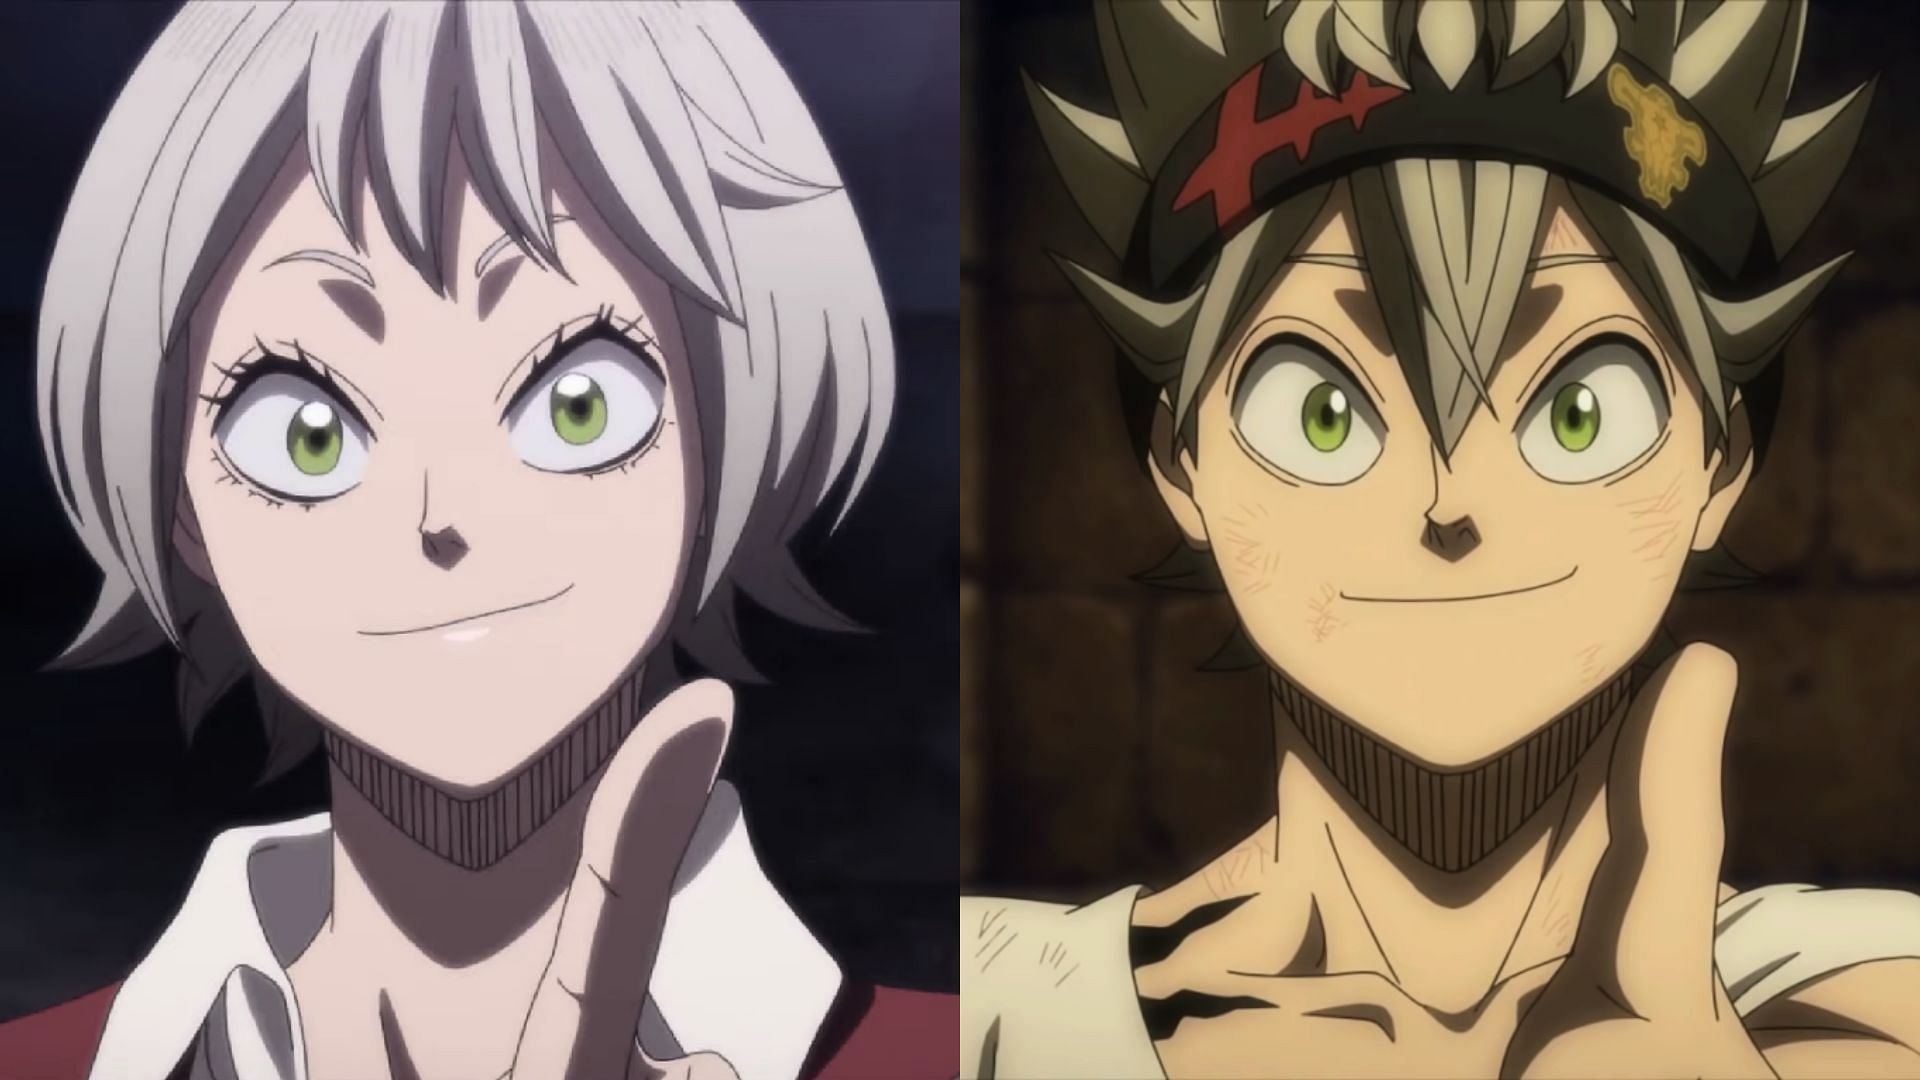 Licita and Asta as seen in Black Clover (Image via Pierrot)